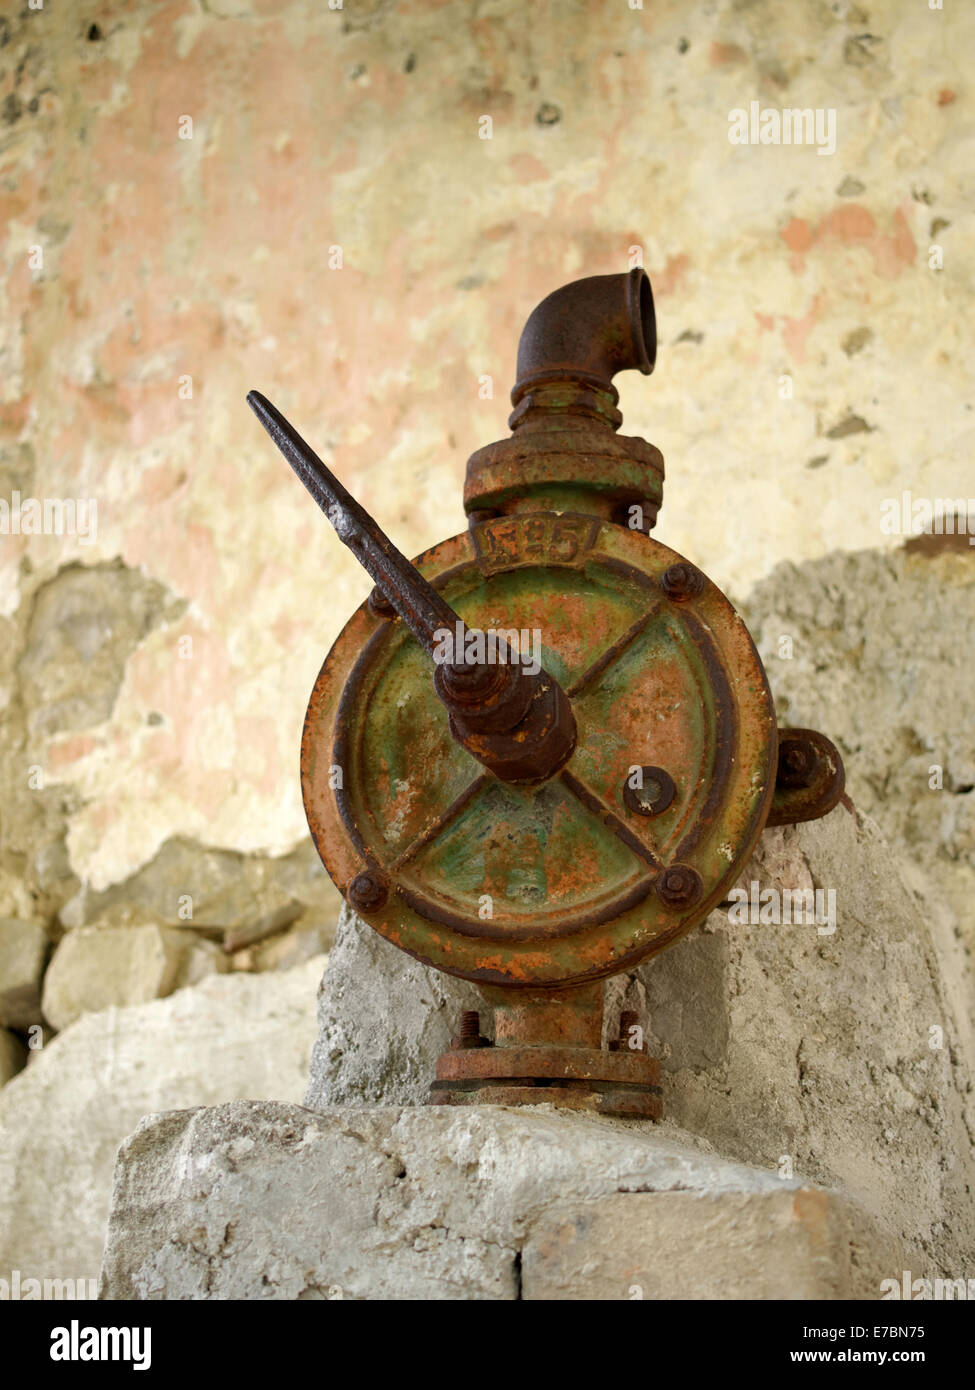 A valve on a hydrant Hum, the smallest town in the world, located in Croatia. Stock Photo